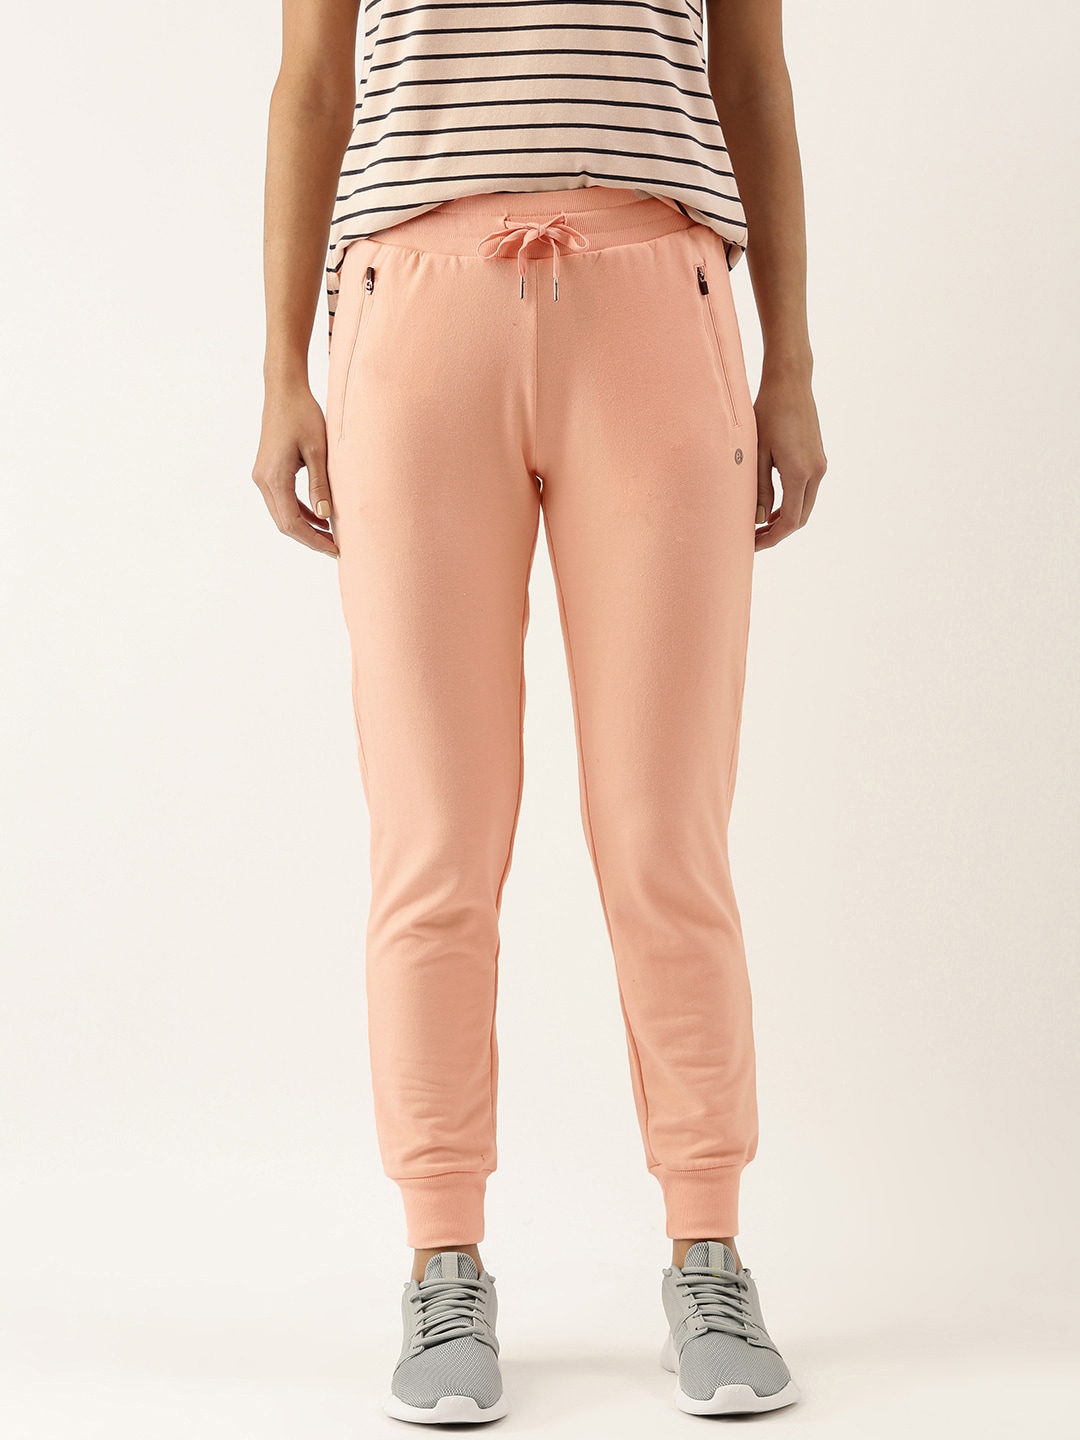 Enamor Womans Pink Athleisure Cotton Spandex Terry Joggers Price in India